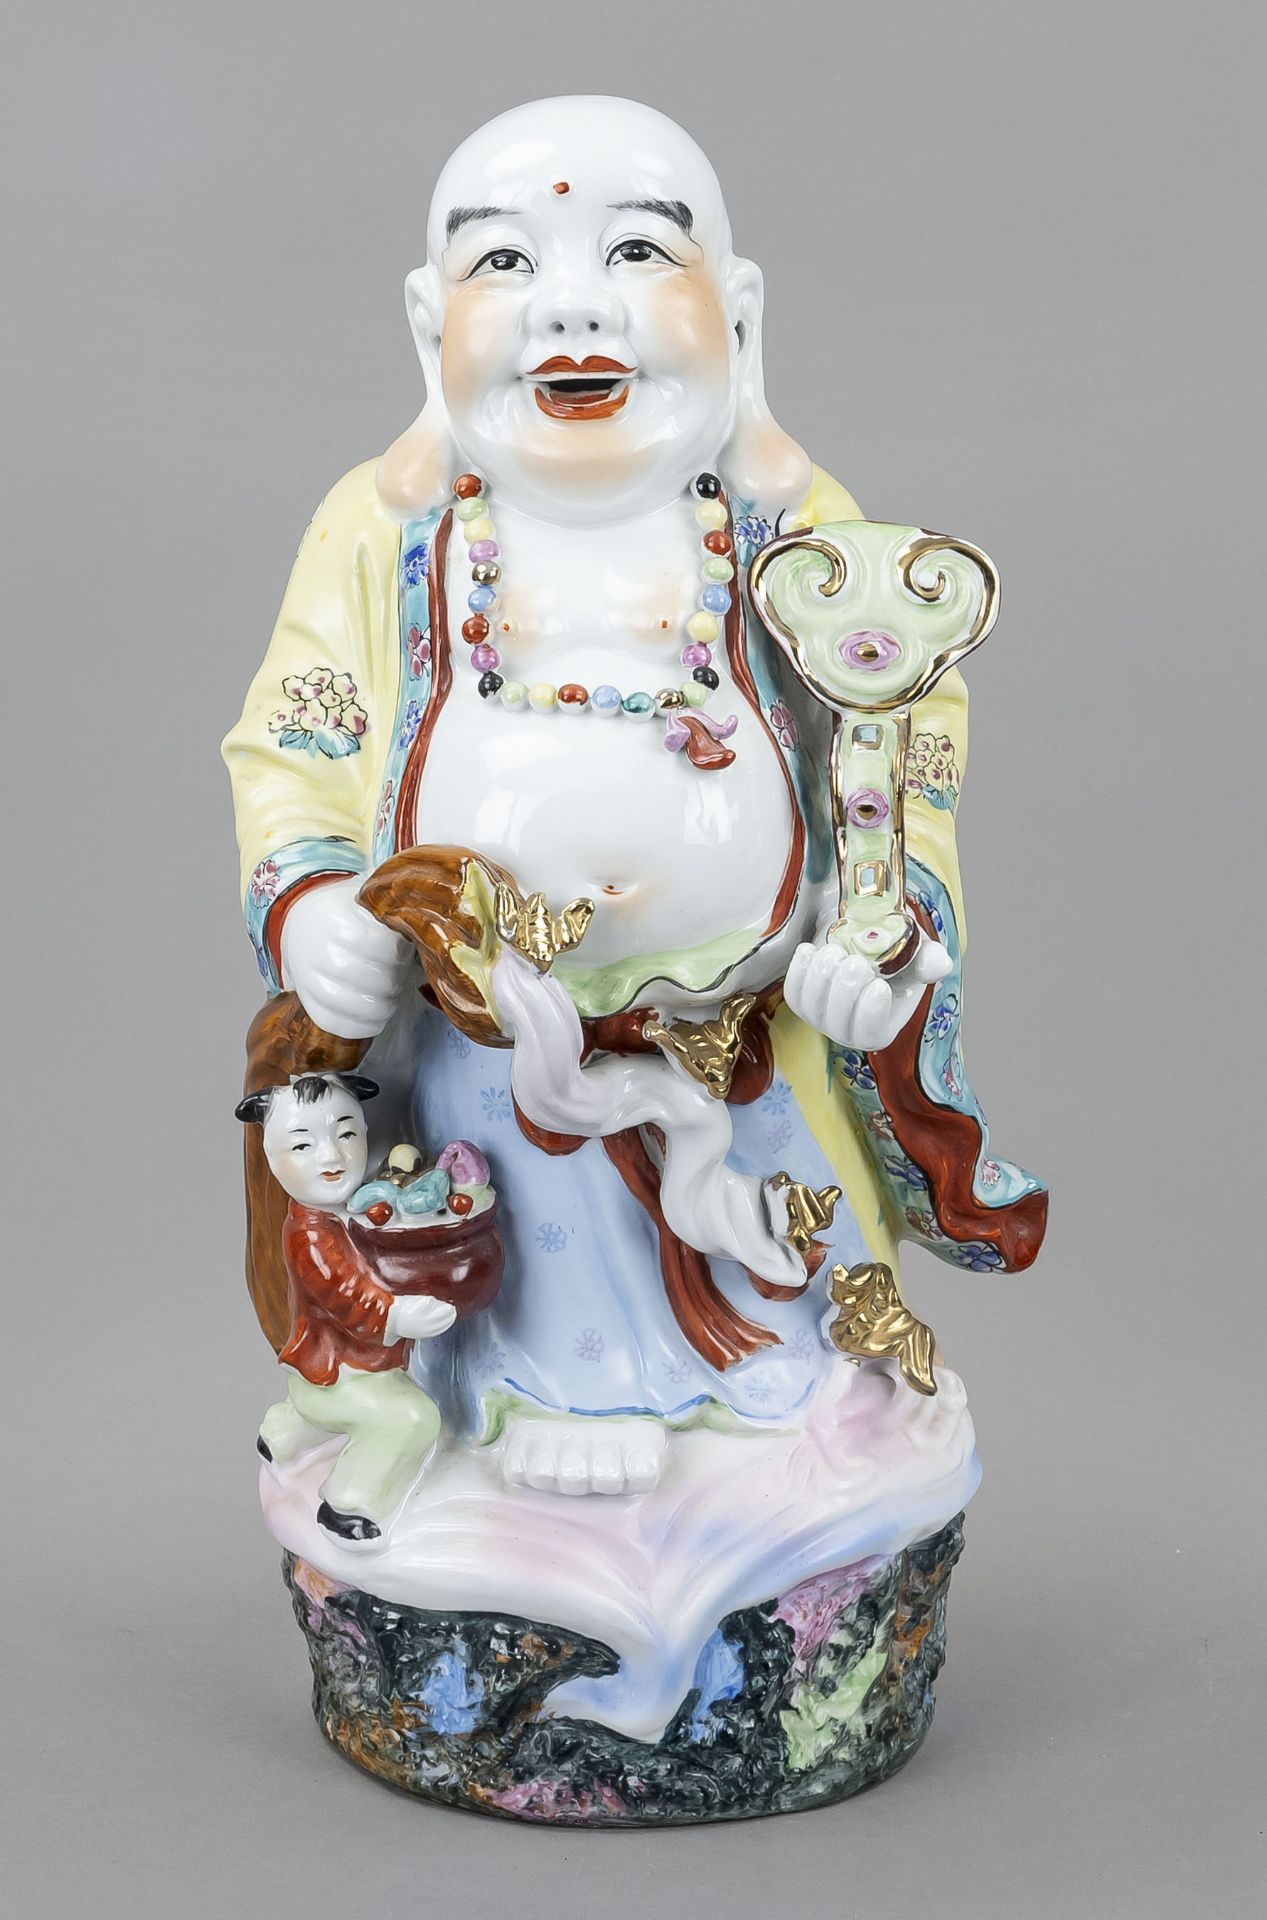 Big-bellied Buddha with his sack and boy, China, 20th century, porcelain figure of Budai with ruyi